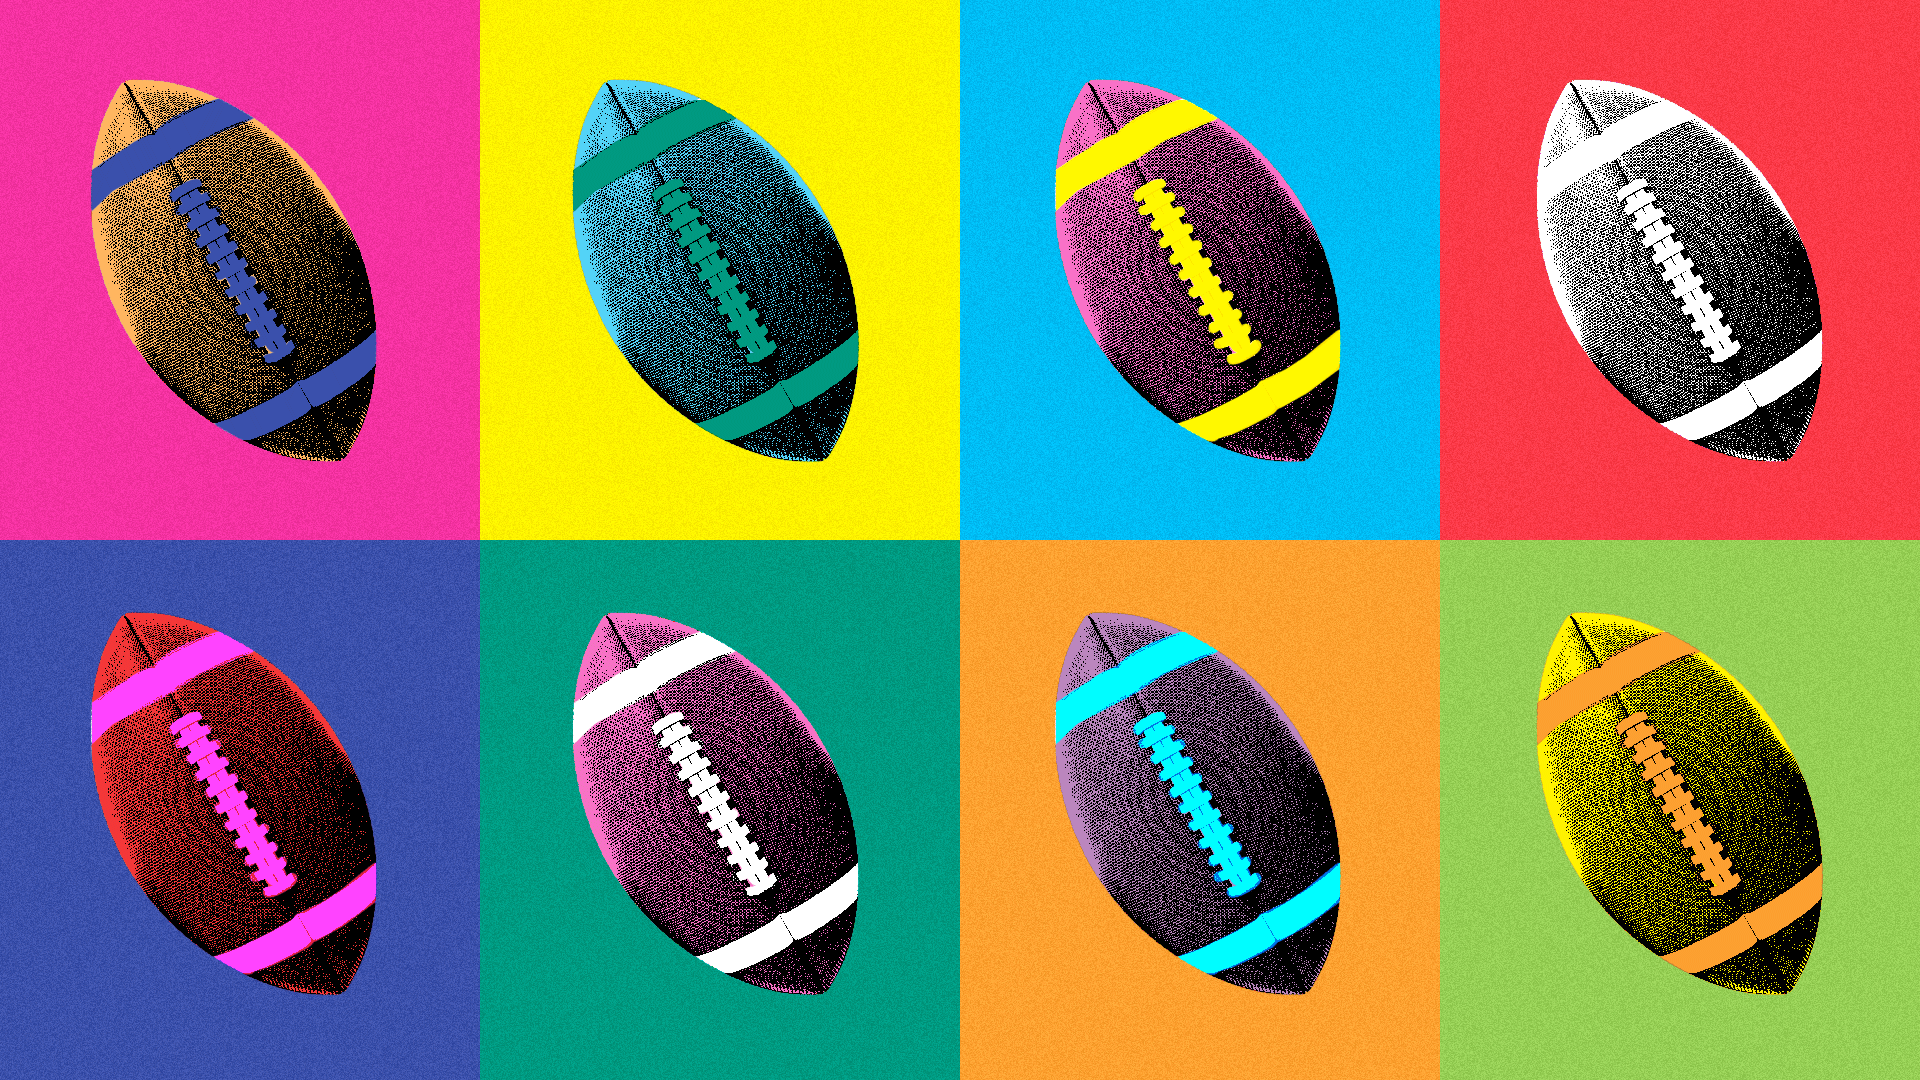 Illustration of eight footballs colorized in various colors and backgrounds, in a Warhol-like style.